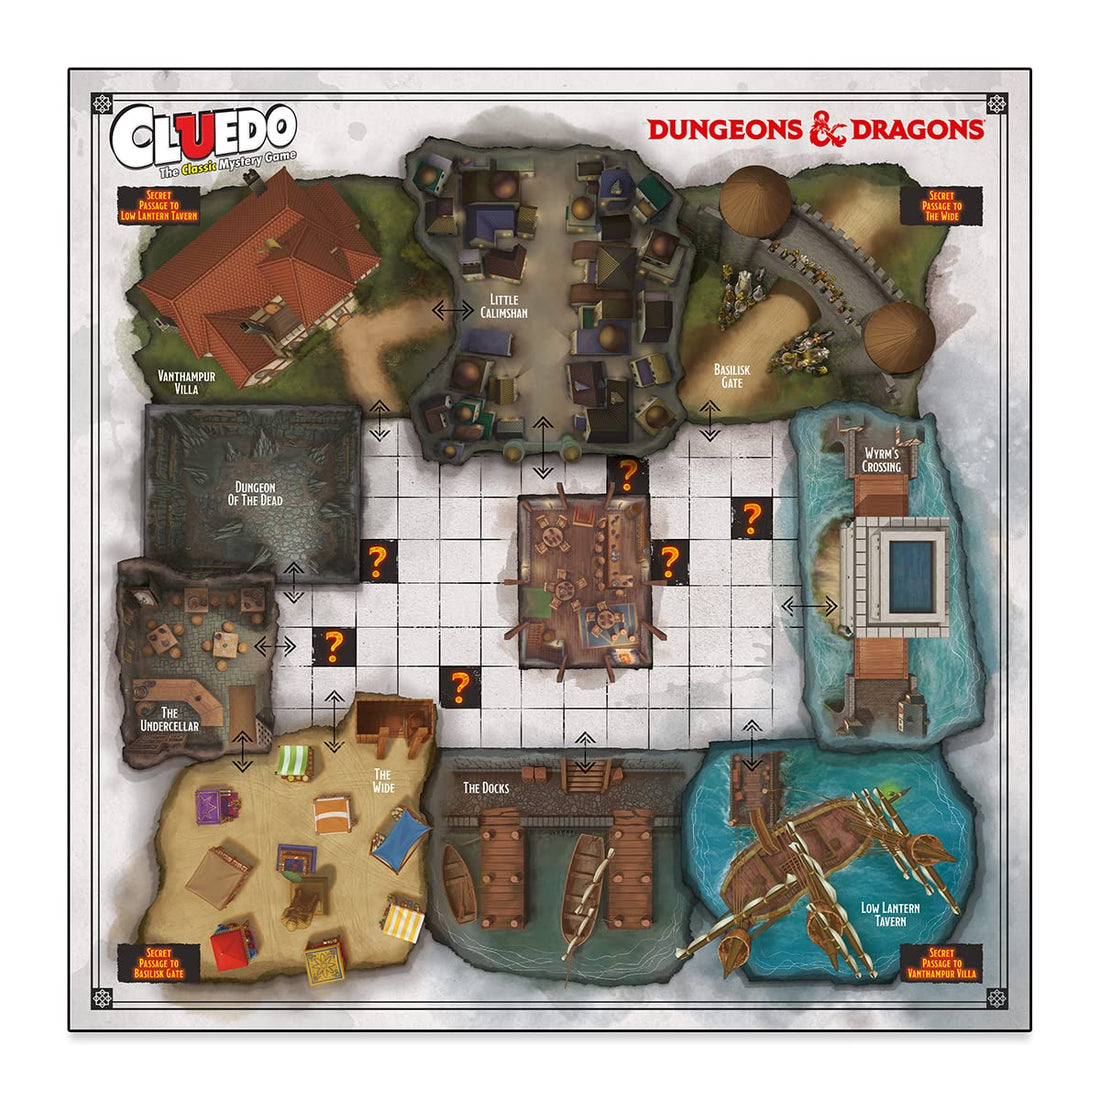 Winning Moves Dungeons and Dragons Cluedo Mystery Board Game, Join Falastar Fisk to discover who was replaced, what weapon was used and where is the Infernal Puzzle box, for ages 12 plus